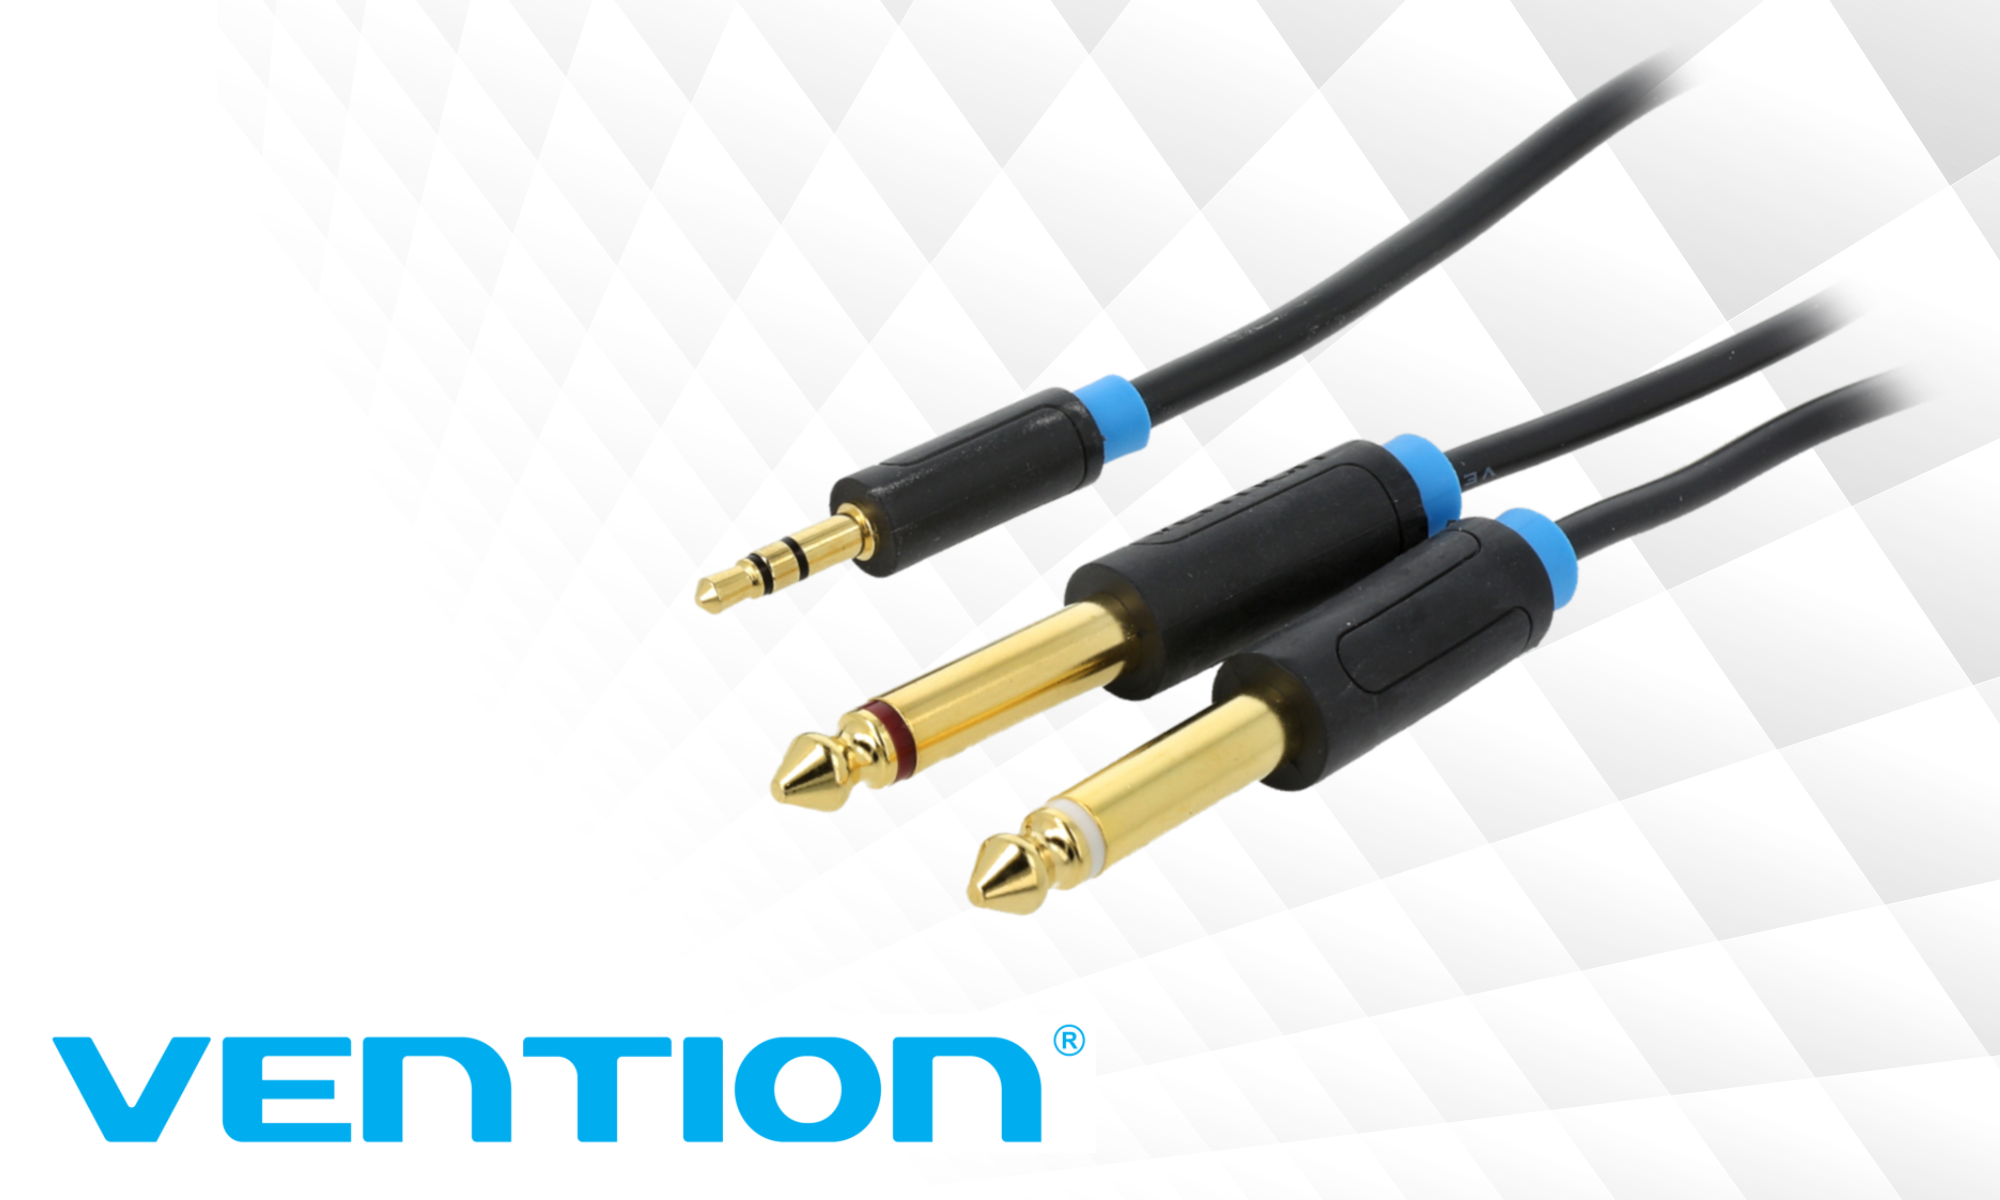 VENTION connection cables